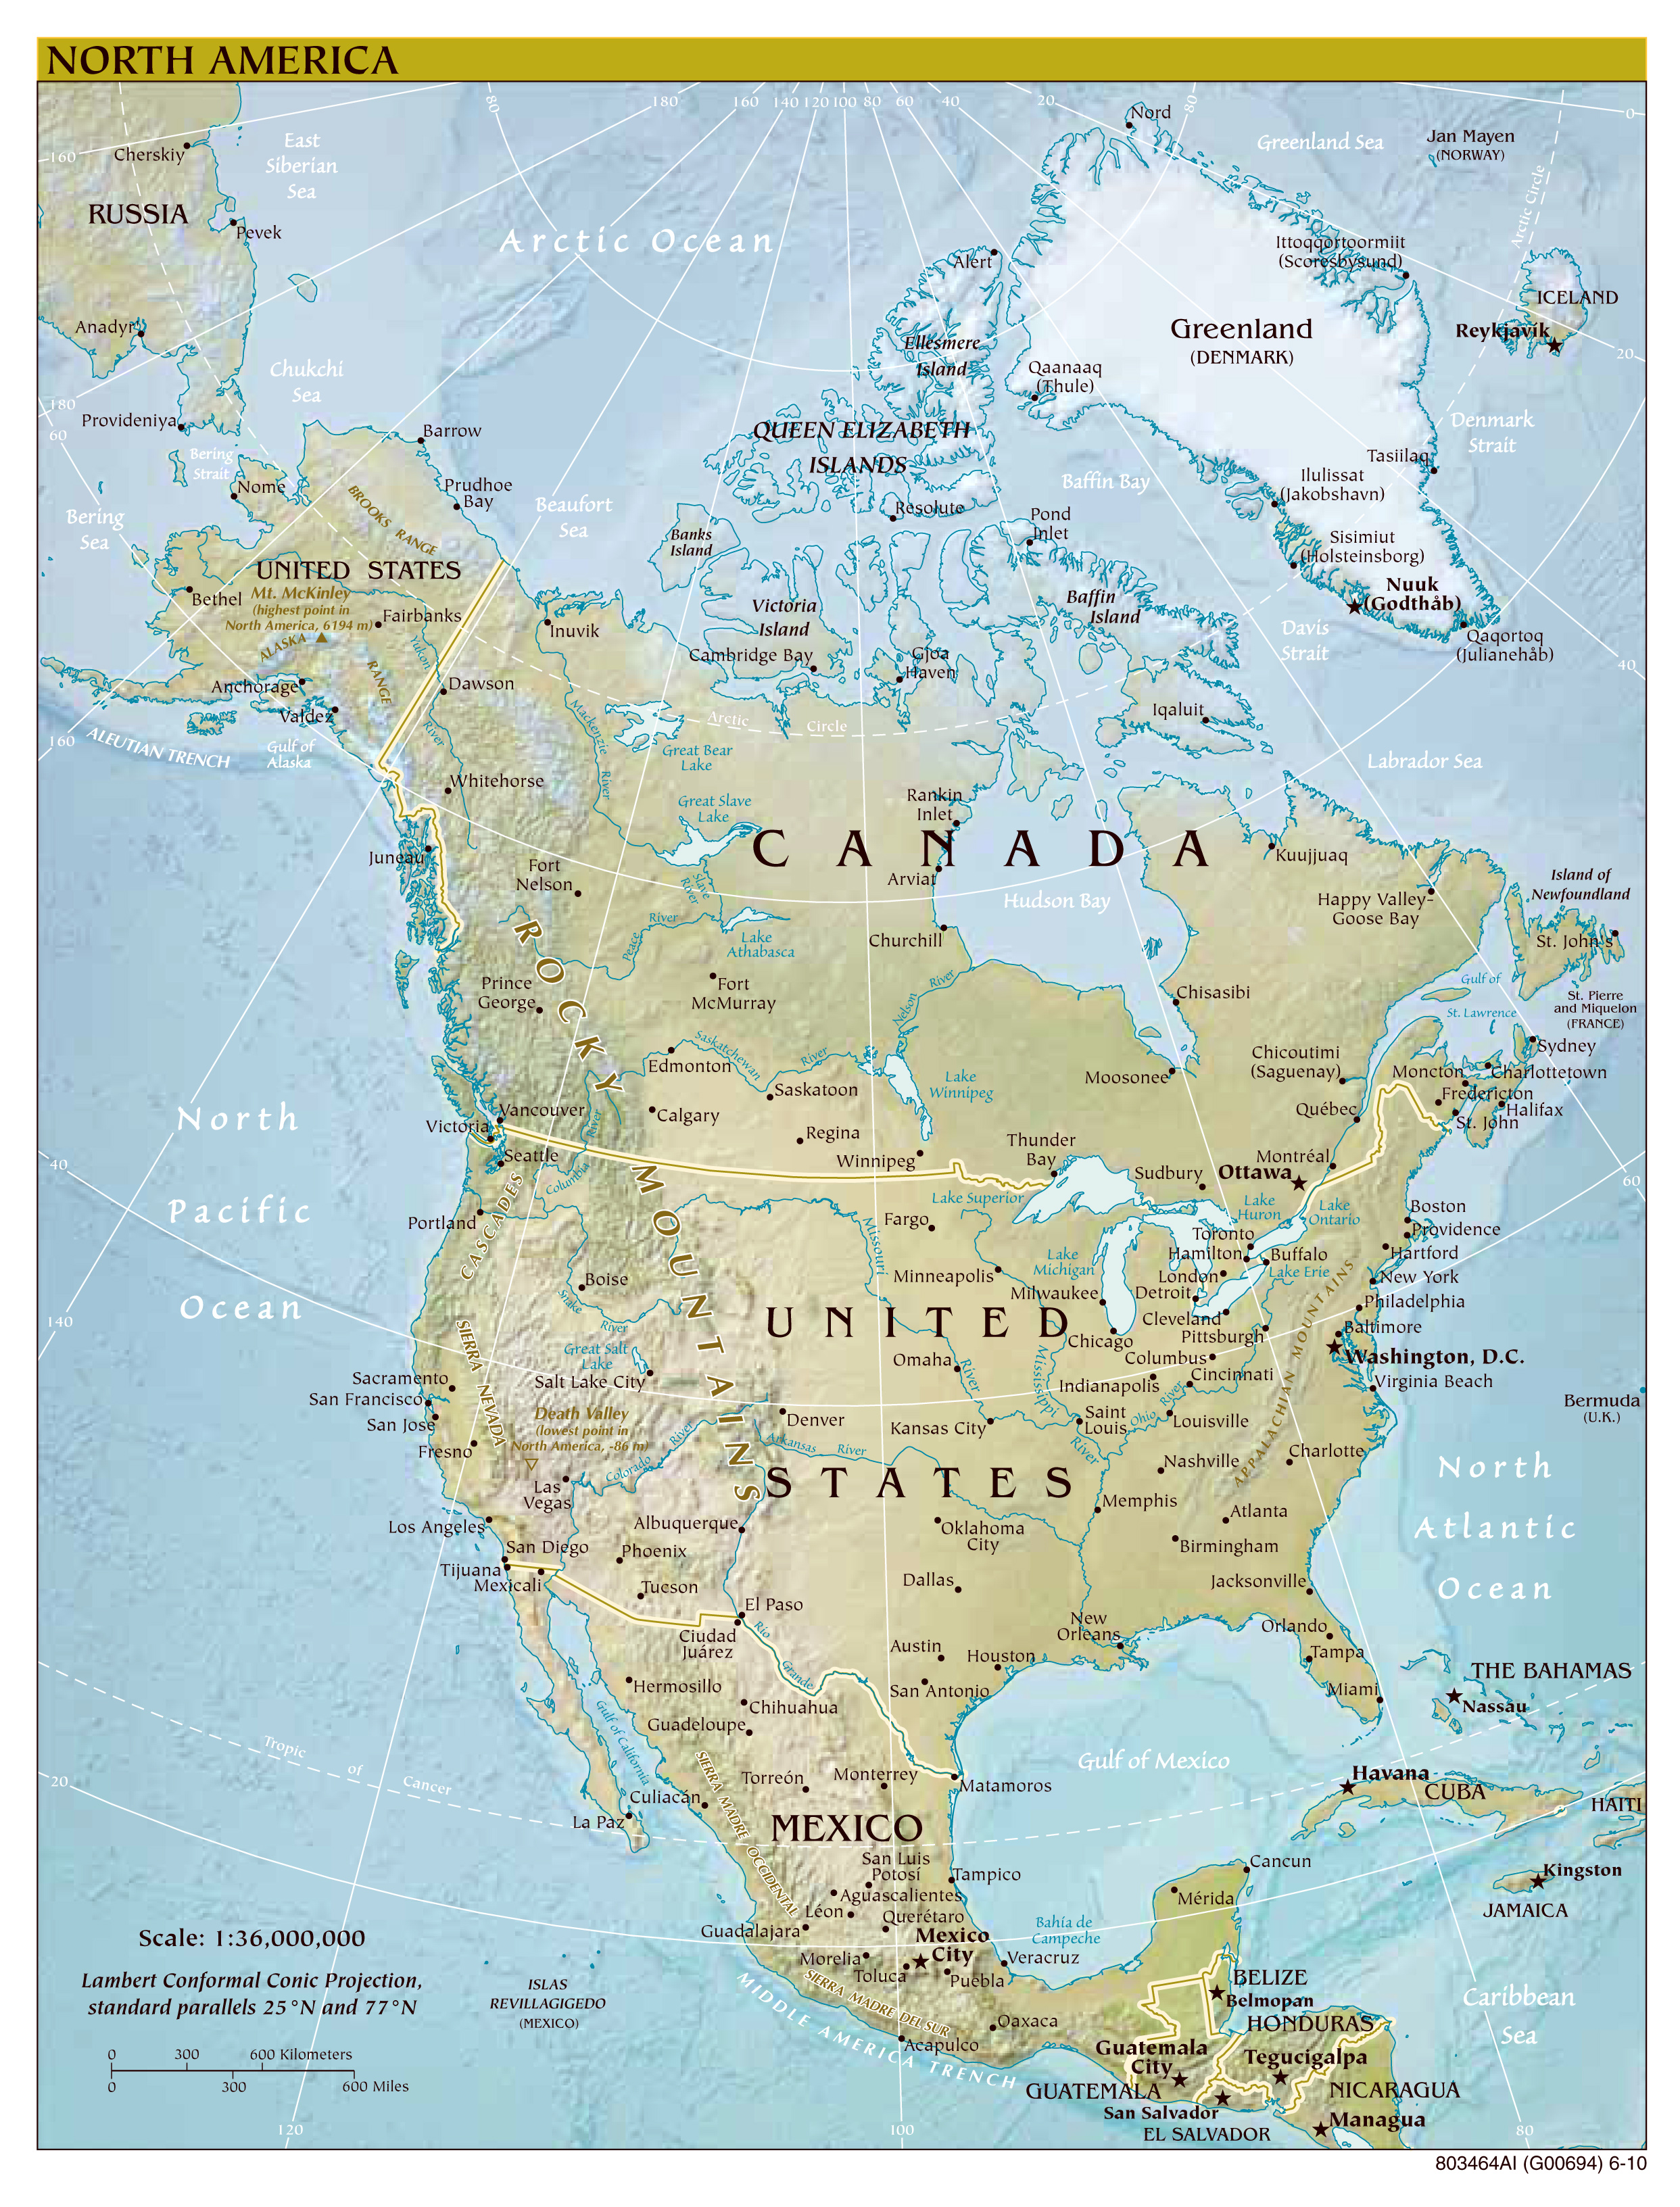 Large scale political map of North America with relief, major cities